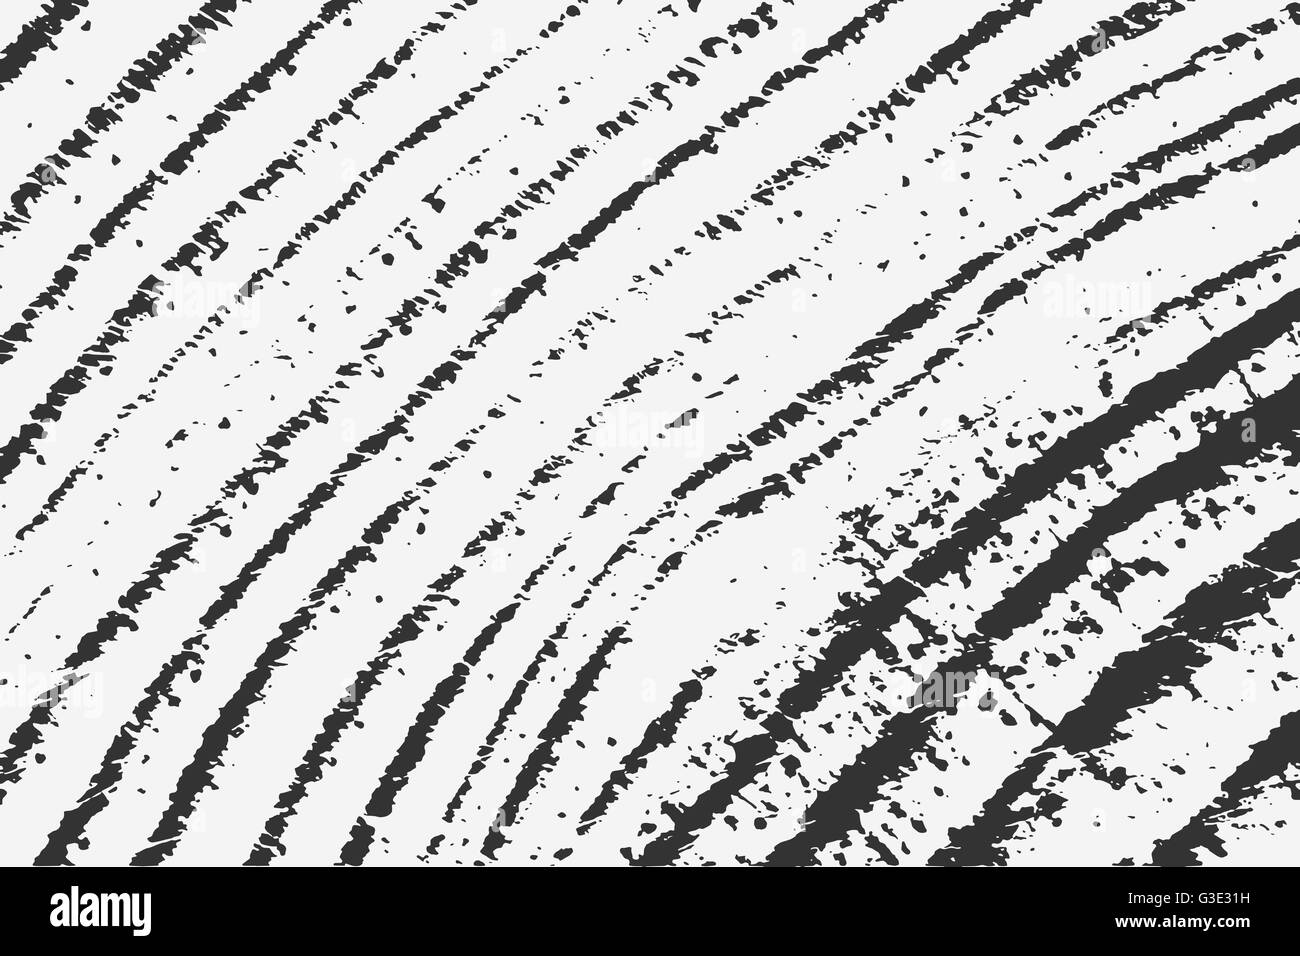 Abstract grunge background. Grunge pine tree texture. Vector illustration of black abstract grunge background for your design Stock Vector